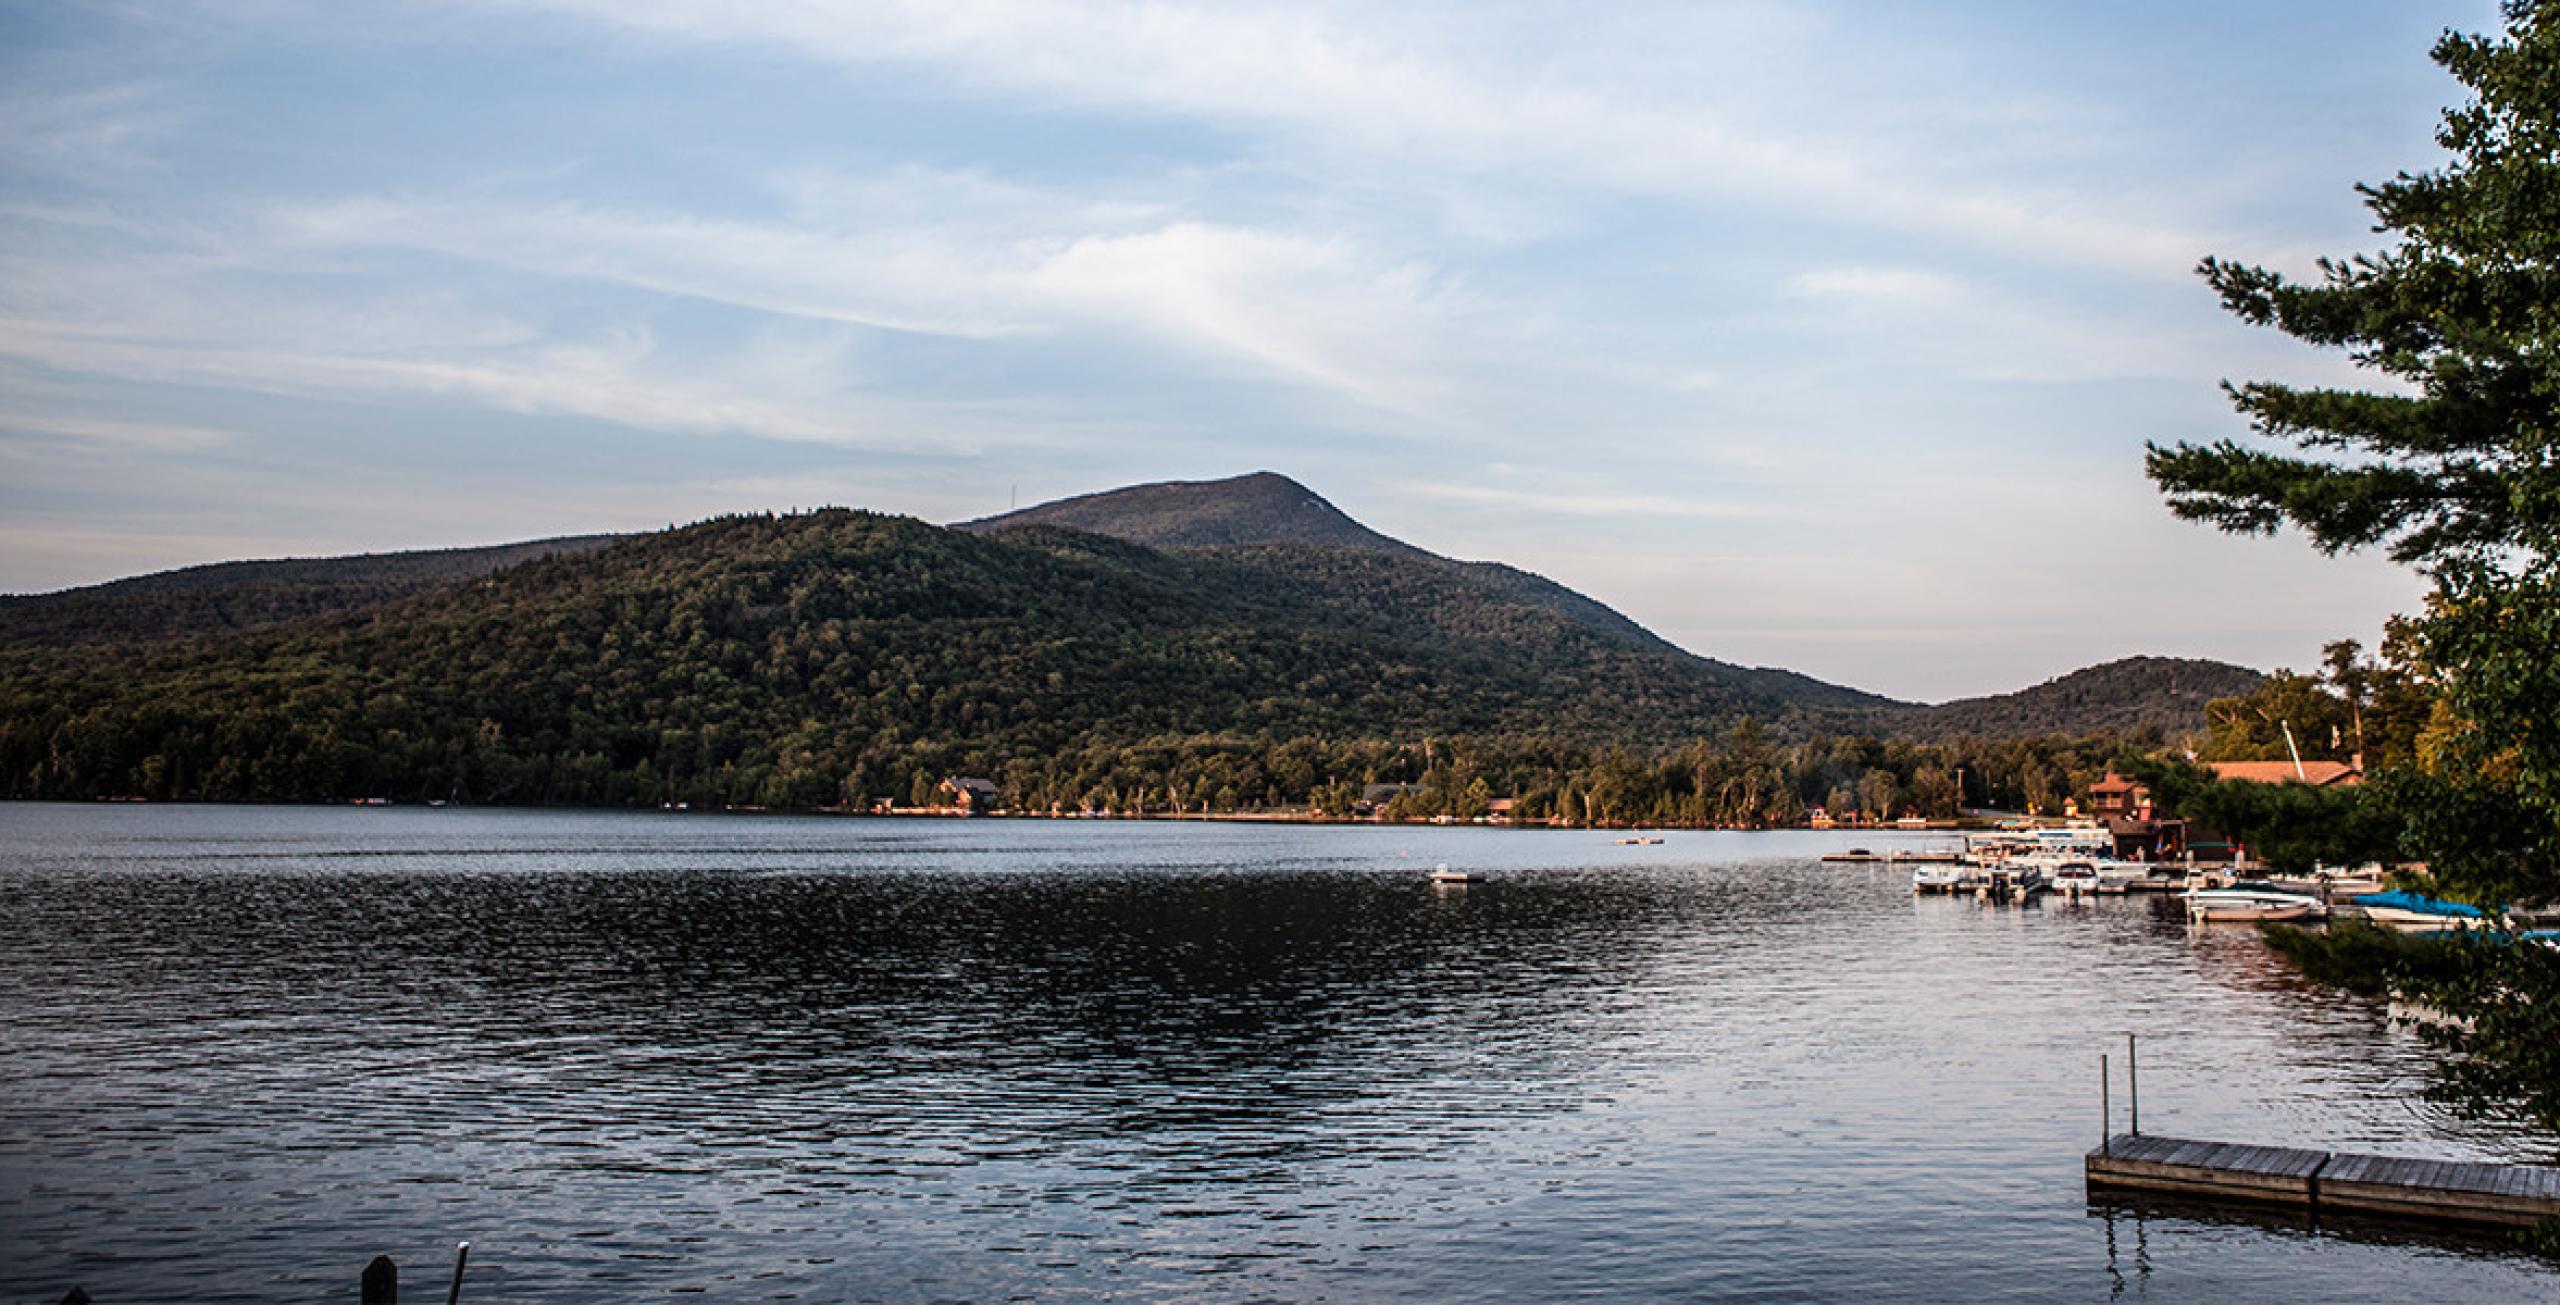 Quiz: Do You Know These ADK Facts?